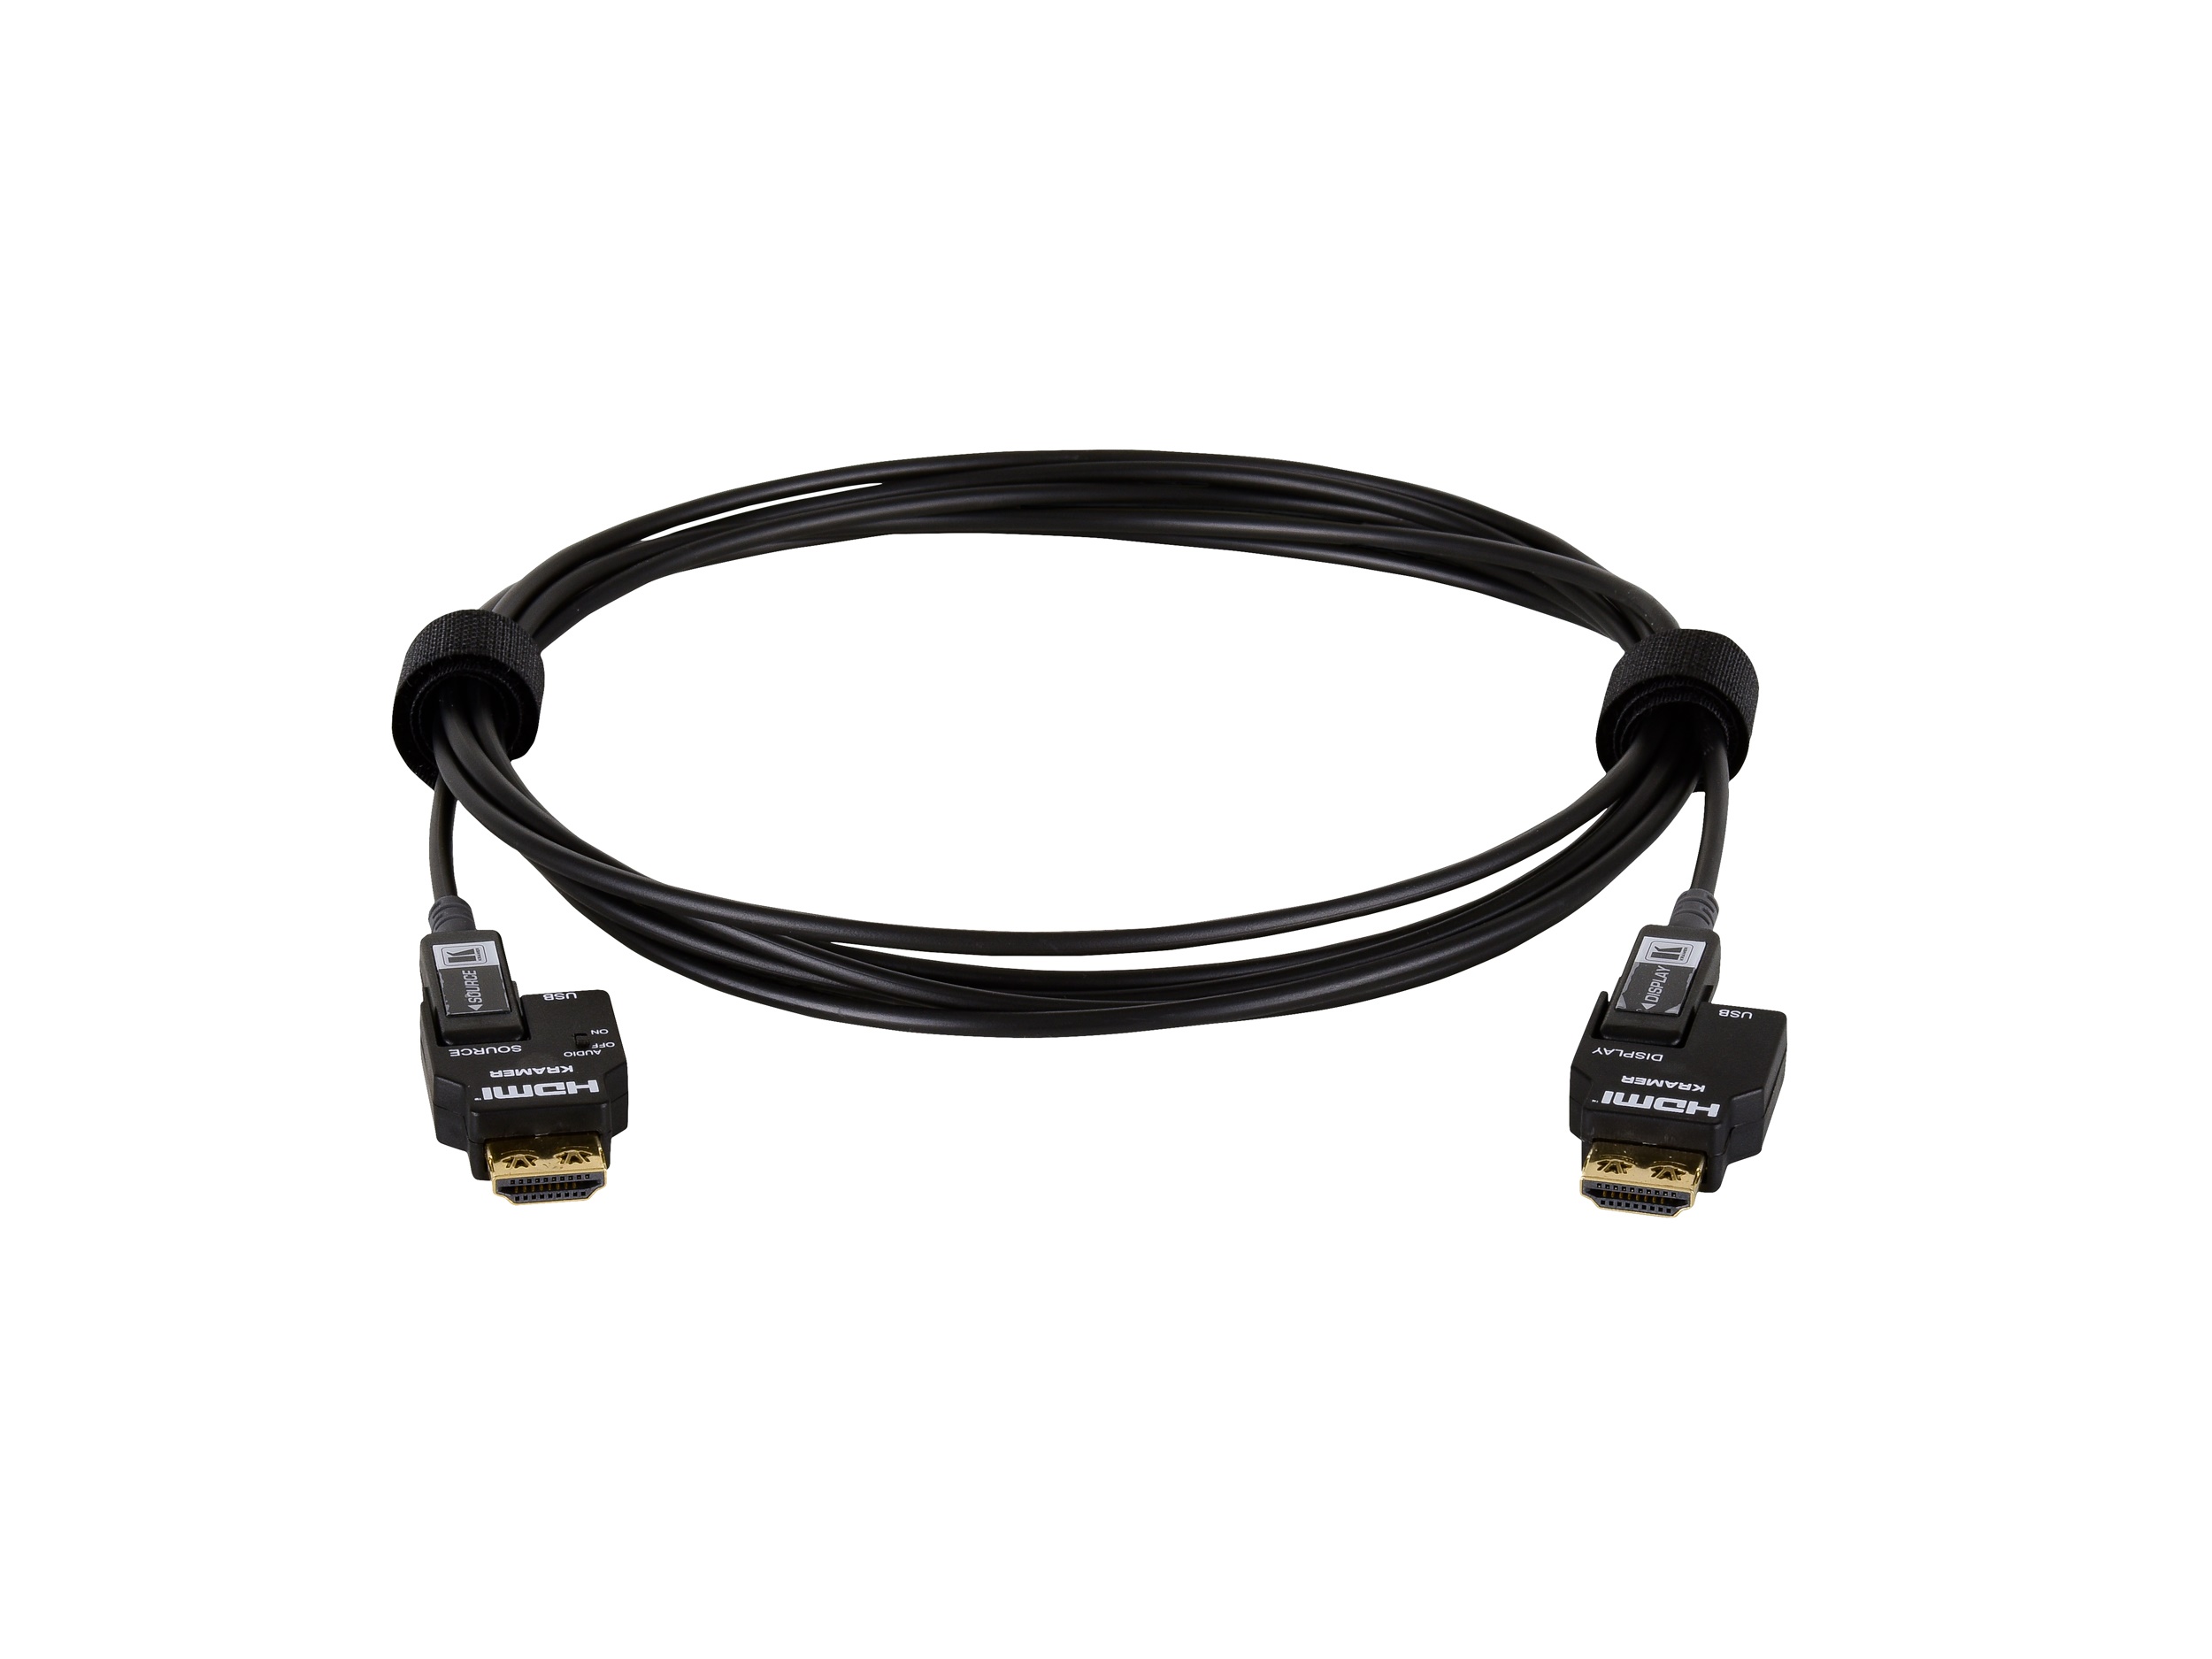 CRS-FIBERH-S1-98 30m/98ft 4K/60Hz (4x2x0) Secured Unidirectional 4K Pluggable HDMI Cable over Pure Fiber Cable by Kramer